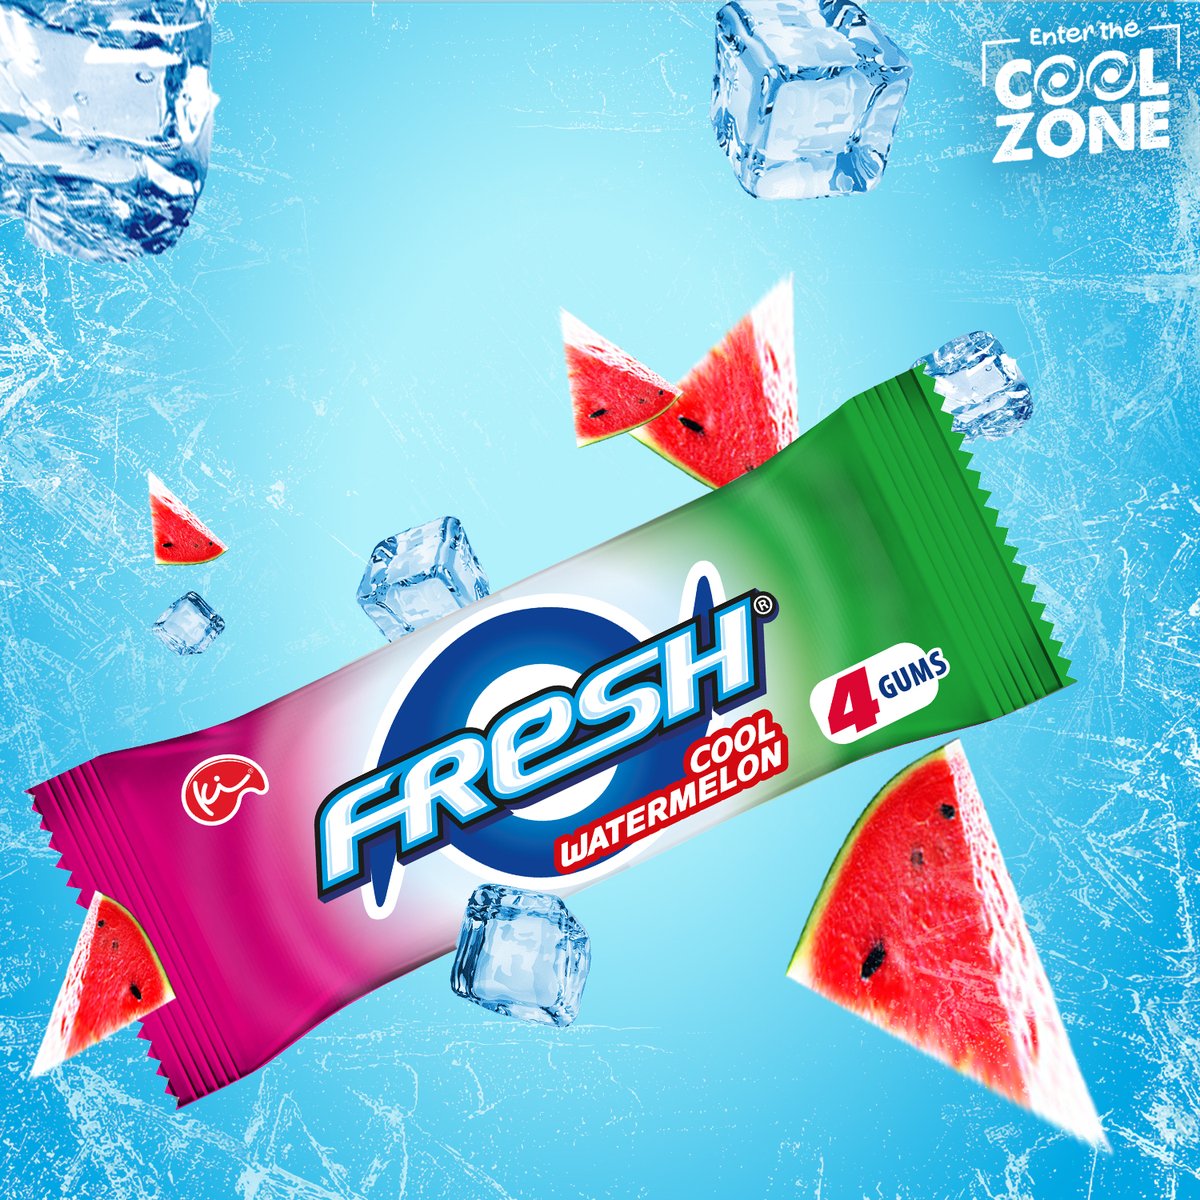 TGIF! Whether on a road trip, staying in doors or turning up…have some FRESH Watermelon with you. #EnterTheCoolZone #FreshChewingGum